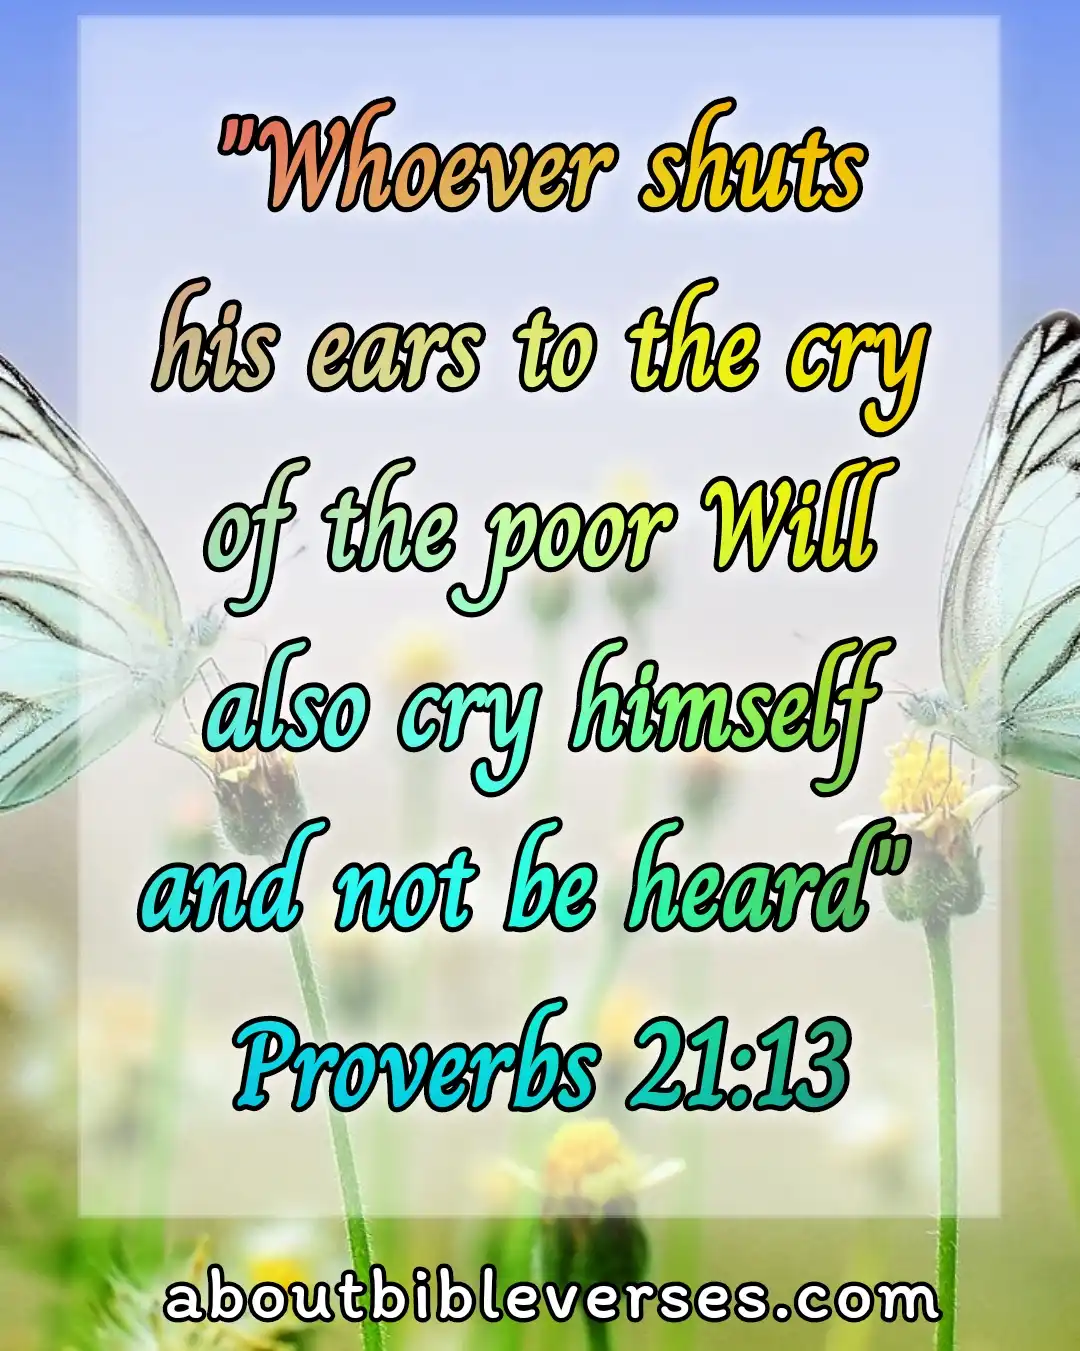 Bible Verse About Helping And Giving To The Poor (Proverbs 21:13)